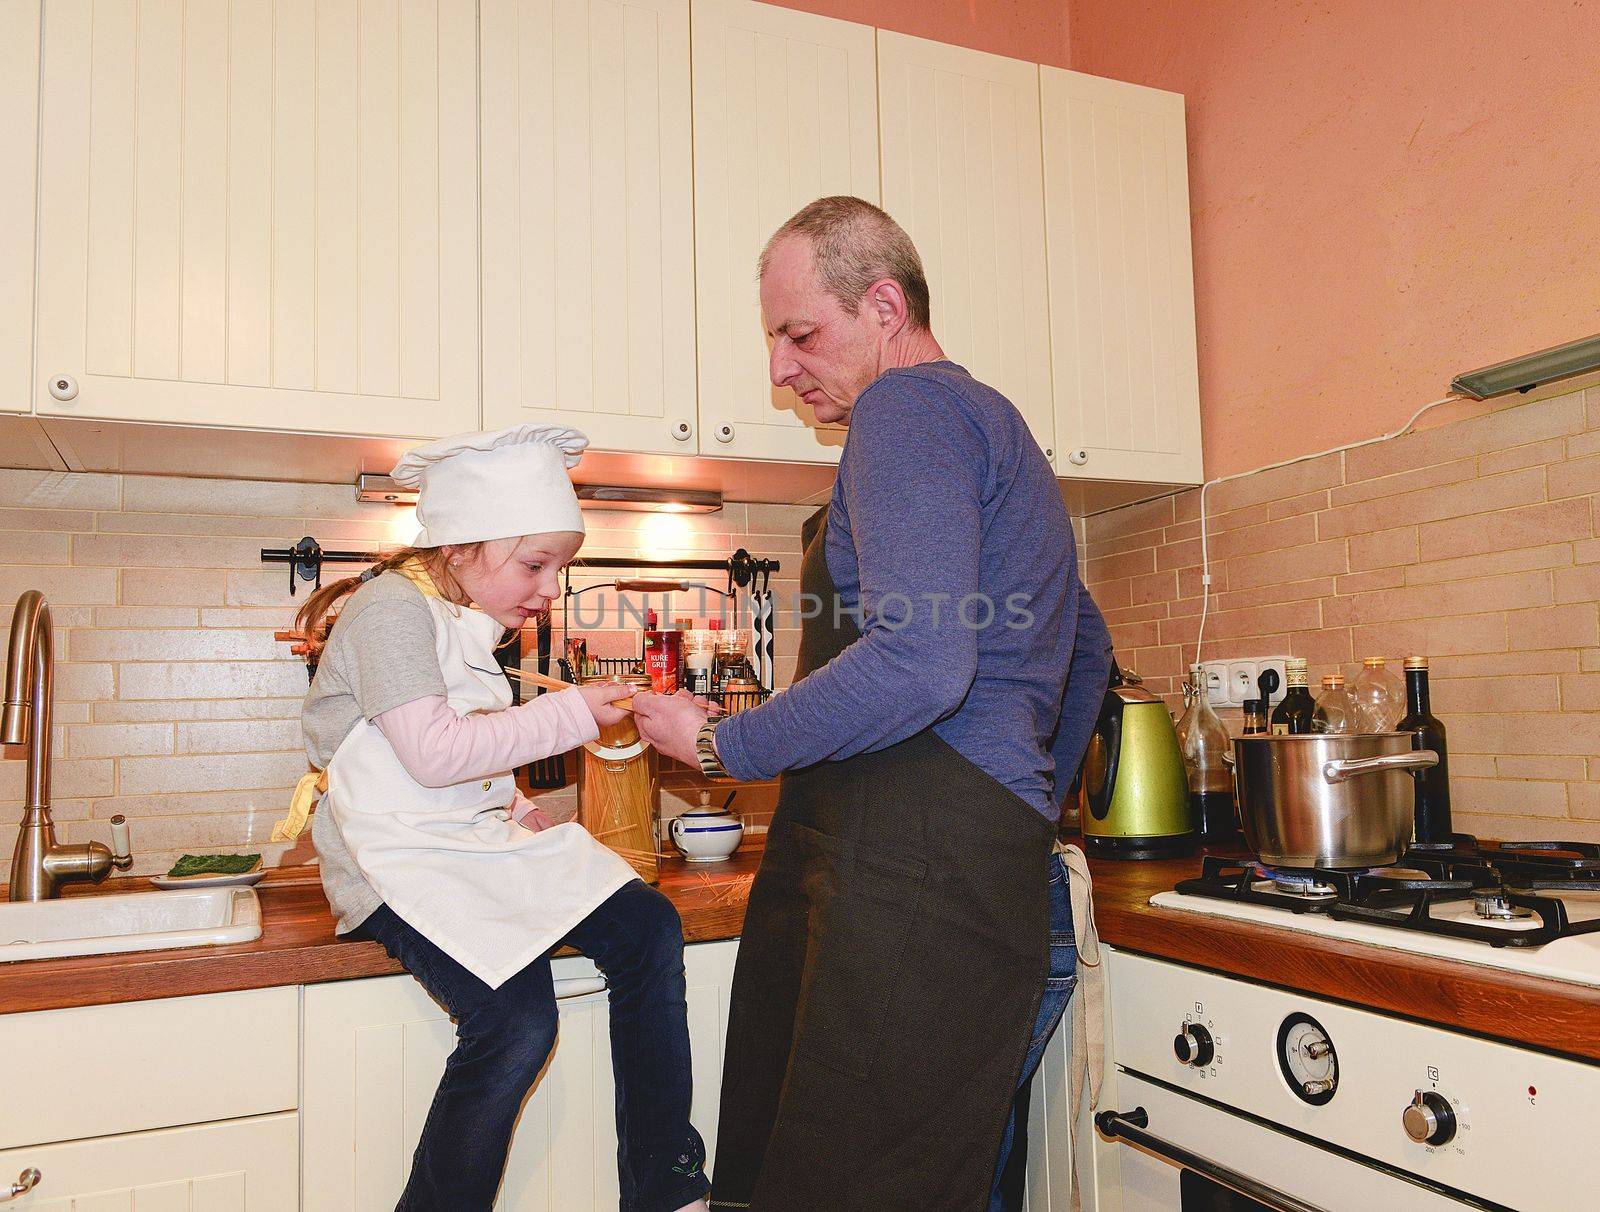 Daughter and father in the kitchen preparing spaghetti to dinner.